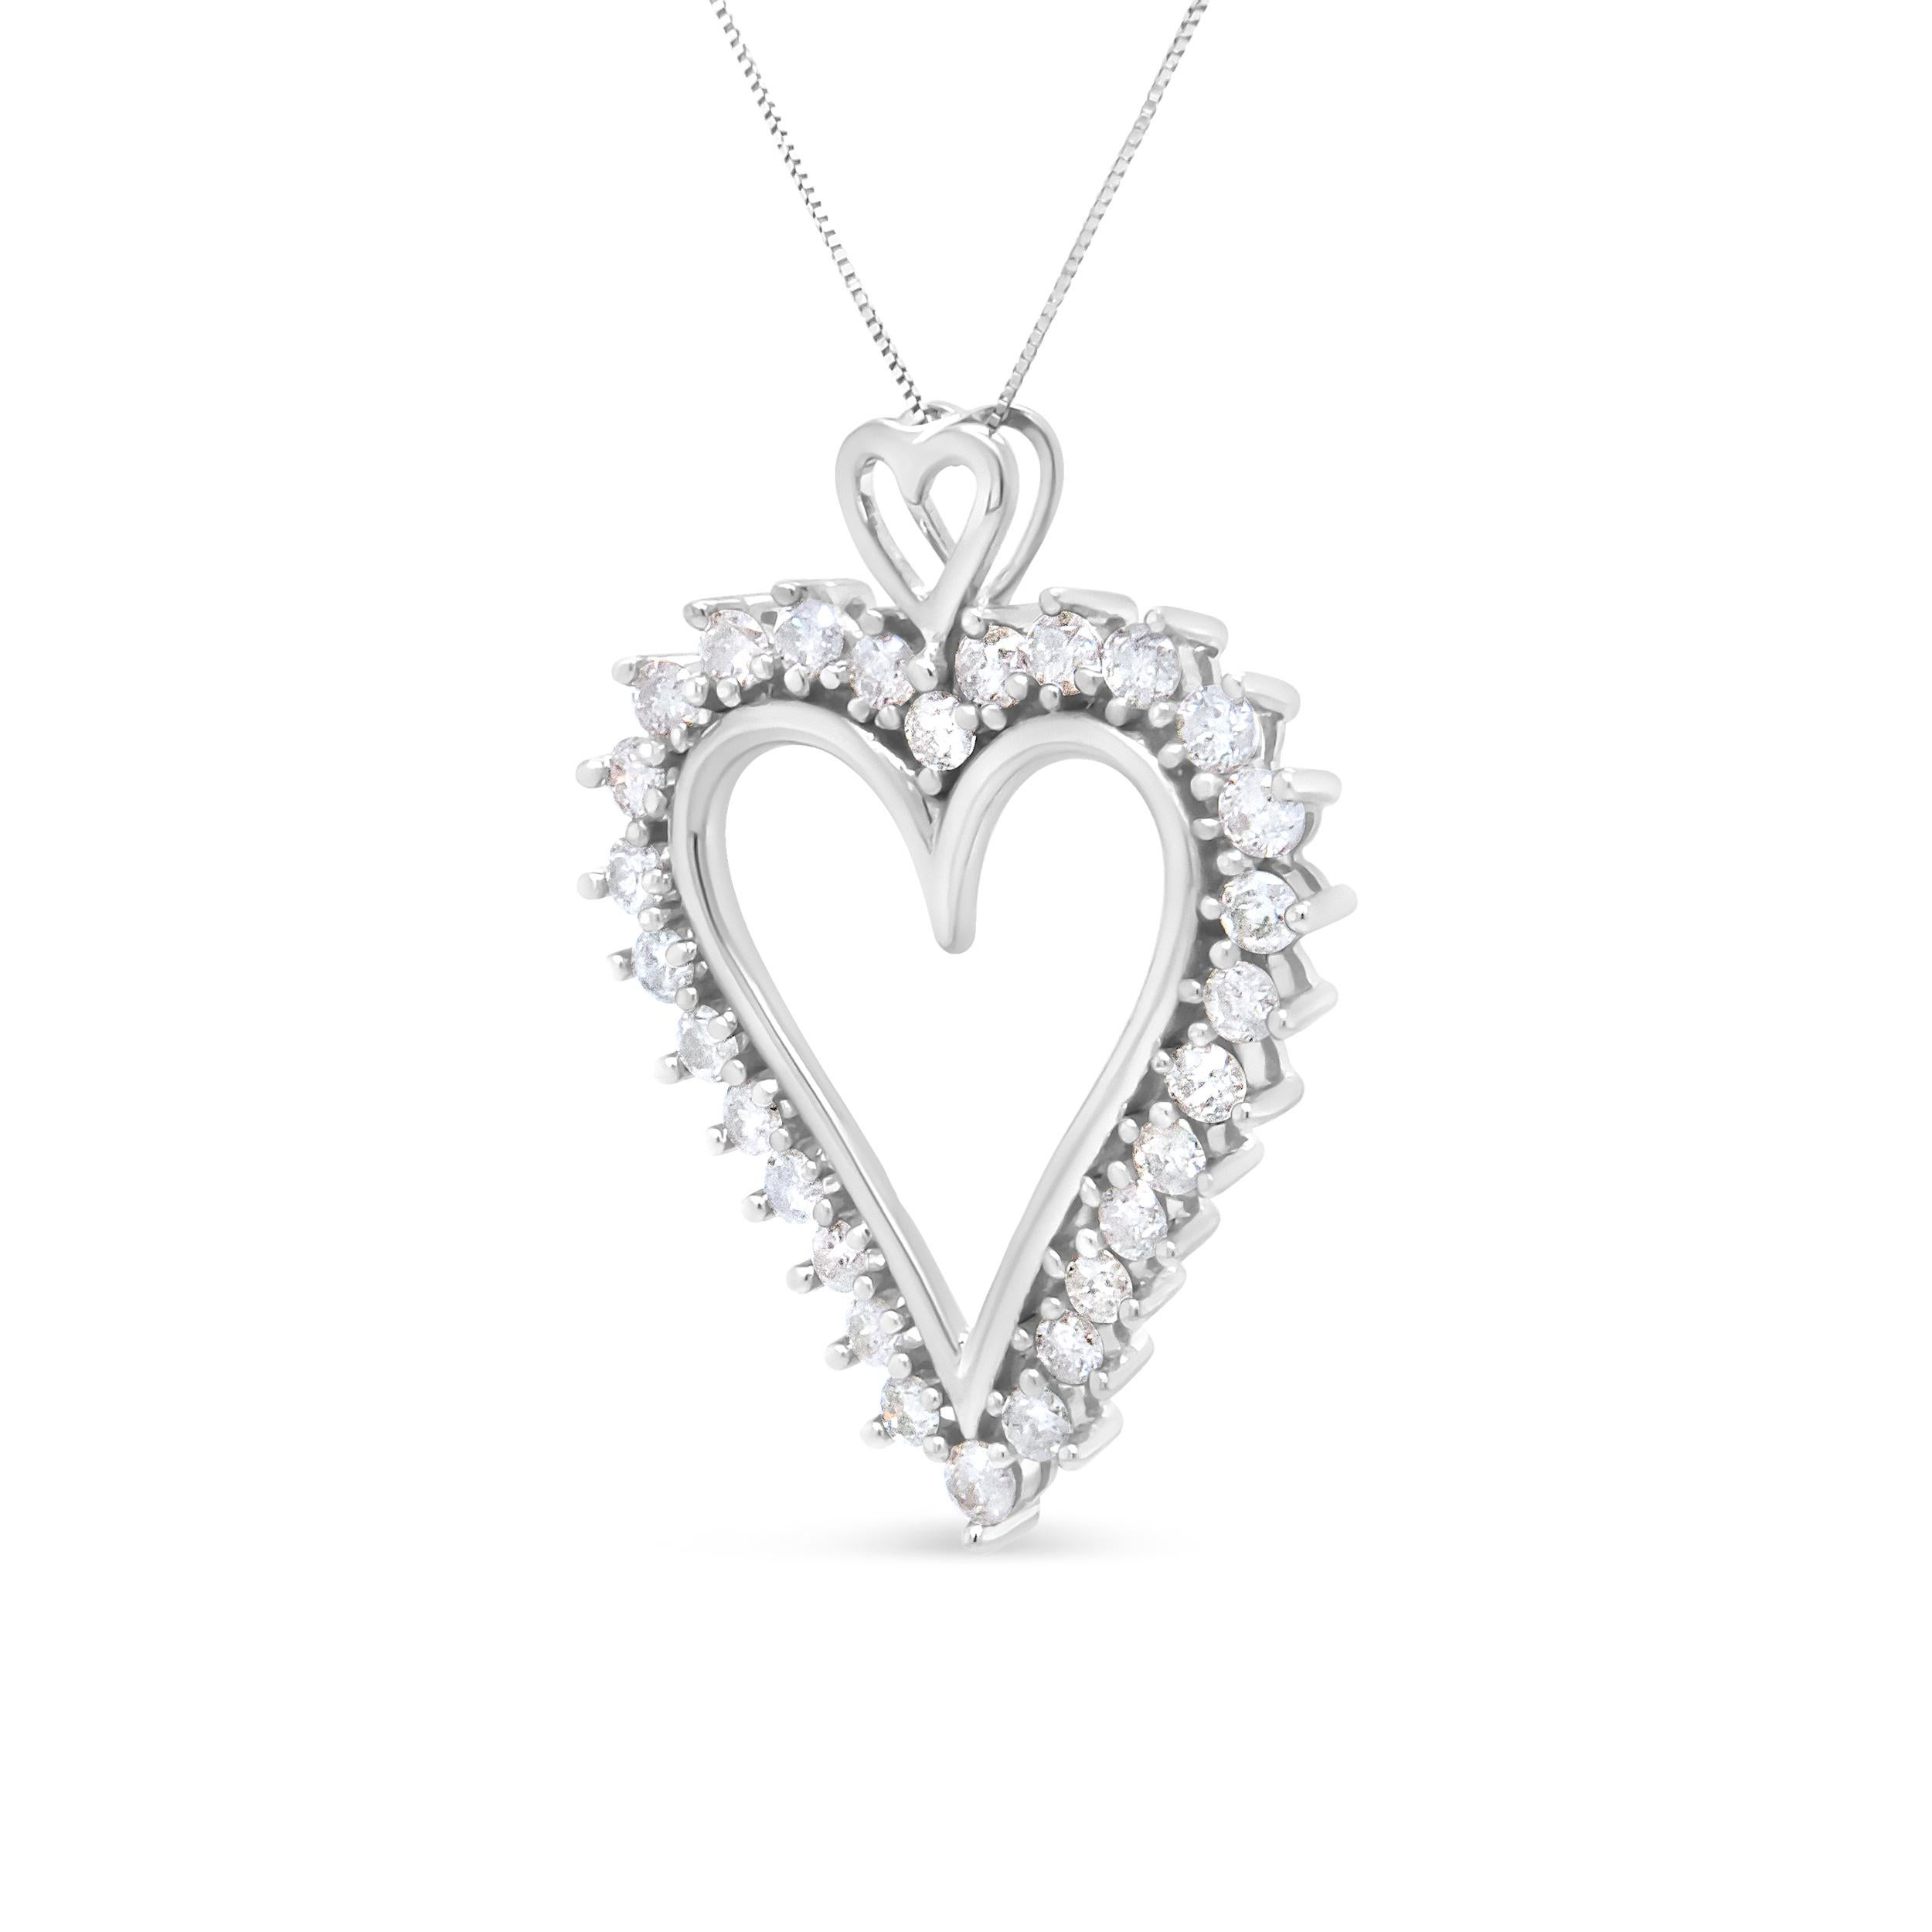 This ravishing .925 sterling silver necklace is a true romantic, shaped in an openwork heart and studded with round diamonds in prong settings. These shimmering white diamonds total 1 3/4 cttw with an approximate I-J color and I2-I3 clarity. The